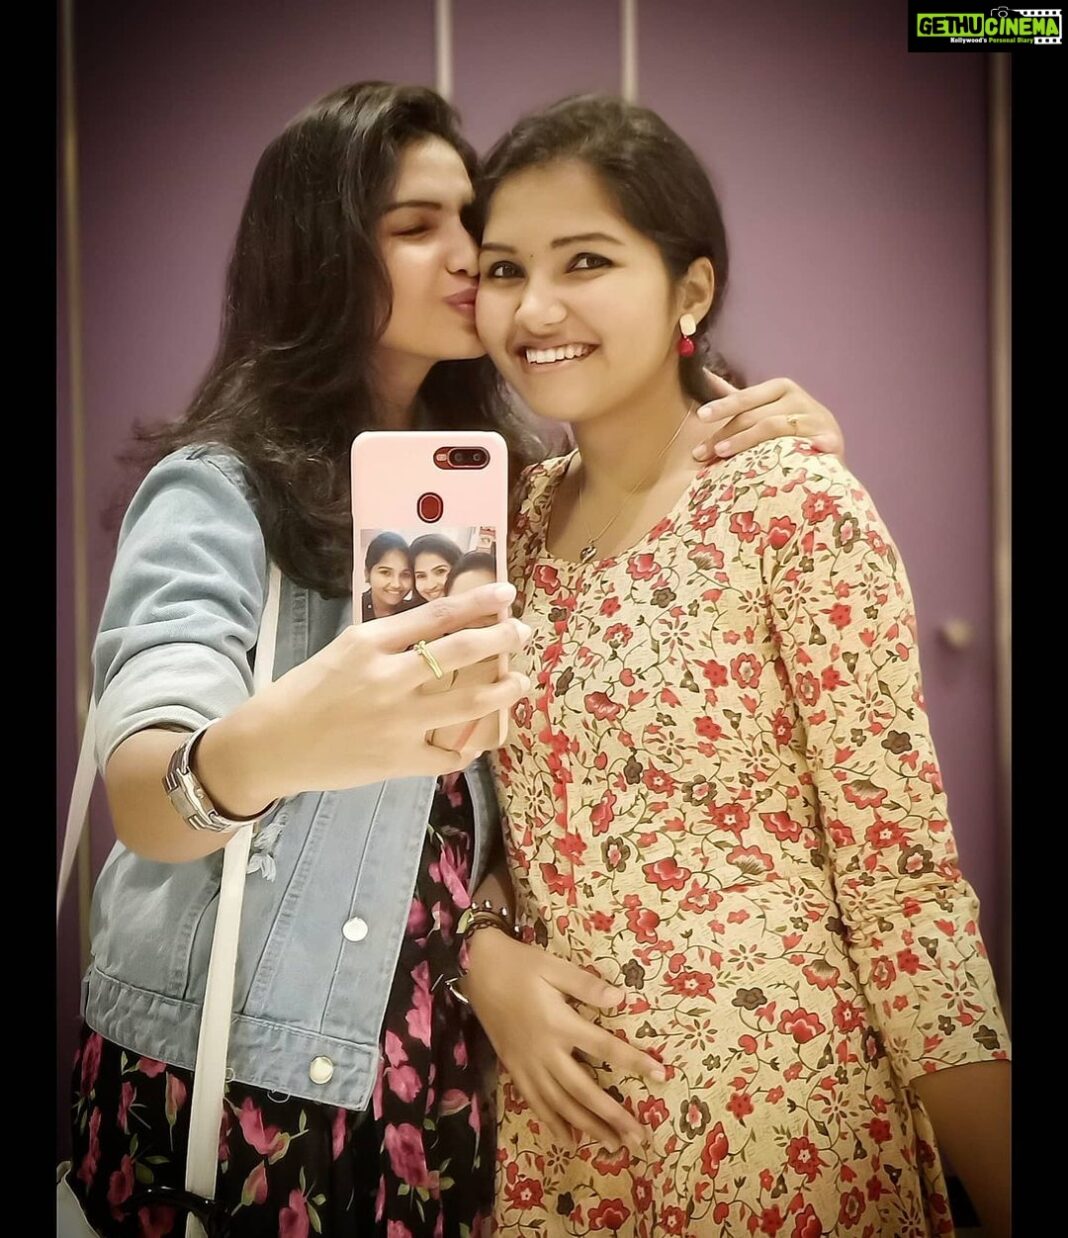 Venba Instagram - HAPPY BIRTHDAY to my mad partner😝 You are a blessing in my life ,little one! ❤❤ Remember that no matter how much you grow up, you will always be my baby girl😘😘🤗 Love you soooooo much da.. Annu😘😘 Missing yu alott🤗🤗🤗 Once again wishing yu a many many more happy returns of the day 🤗🤗 @nandhu_025 ❤❤ #happybirthday #sisterlove #sisterbirthday #enjoy #fun #birthday #birthdaygirl #babygirl #missingyou